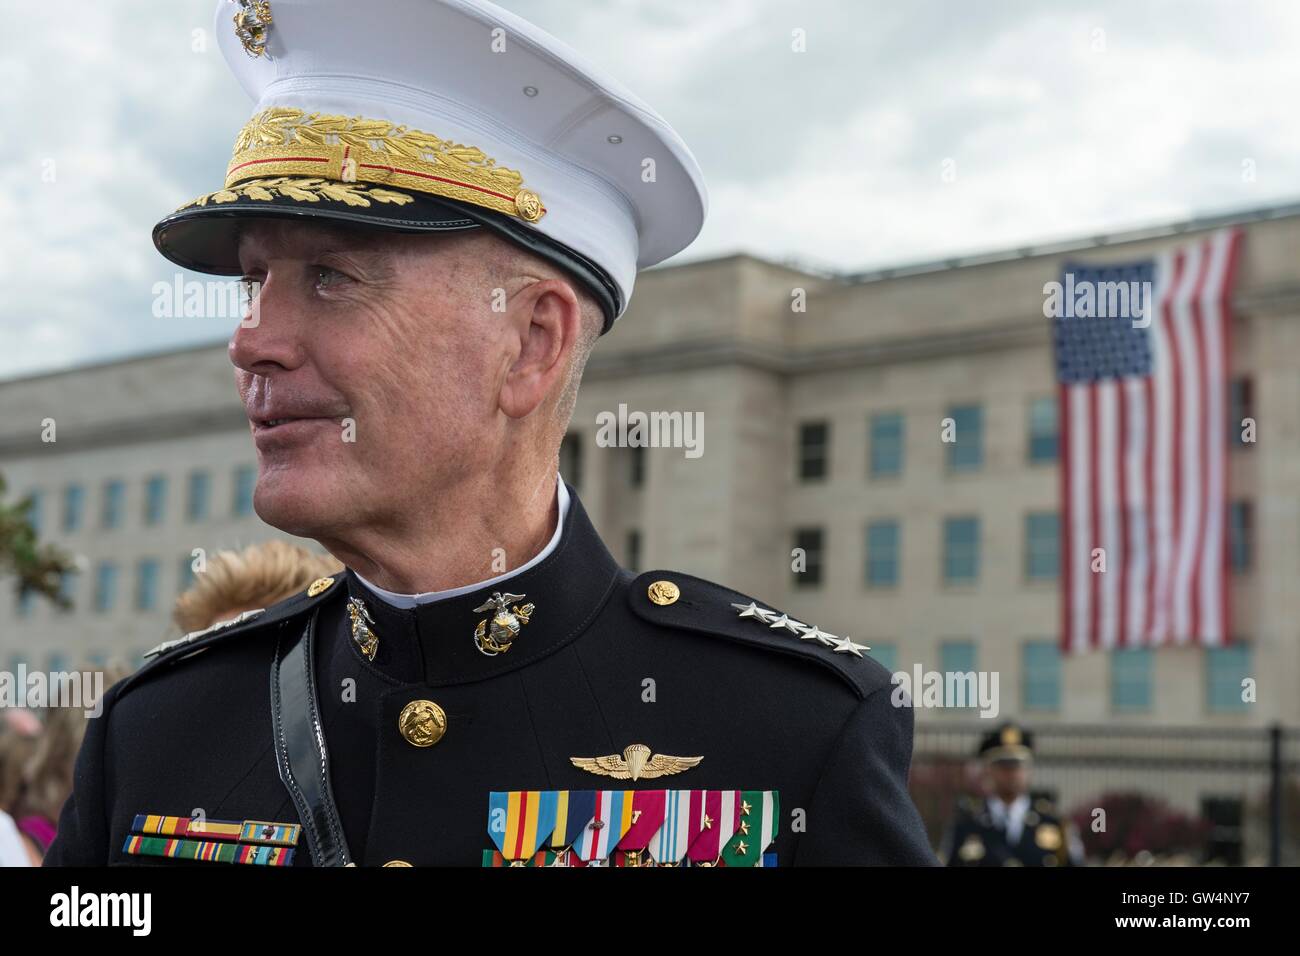 Joint Chiefs Chairman Gen. Joseph F. Dunford Jr. at a remembrance ceremony commemorating the 15th anniversary of the 9/11 terrorist attacks at the Pentagon September 11, 2016 in Arlington, Virginia. Stock Photo